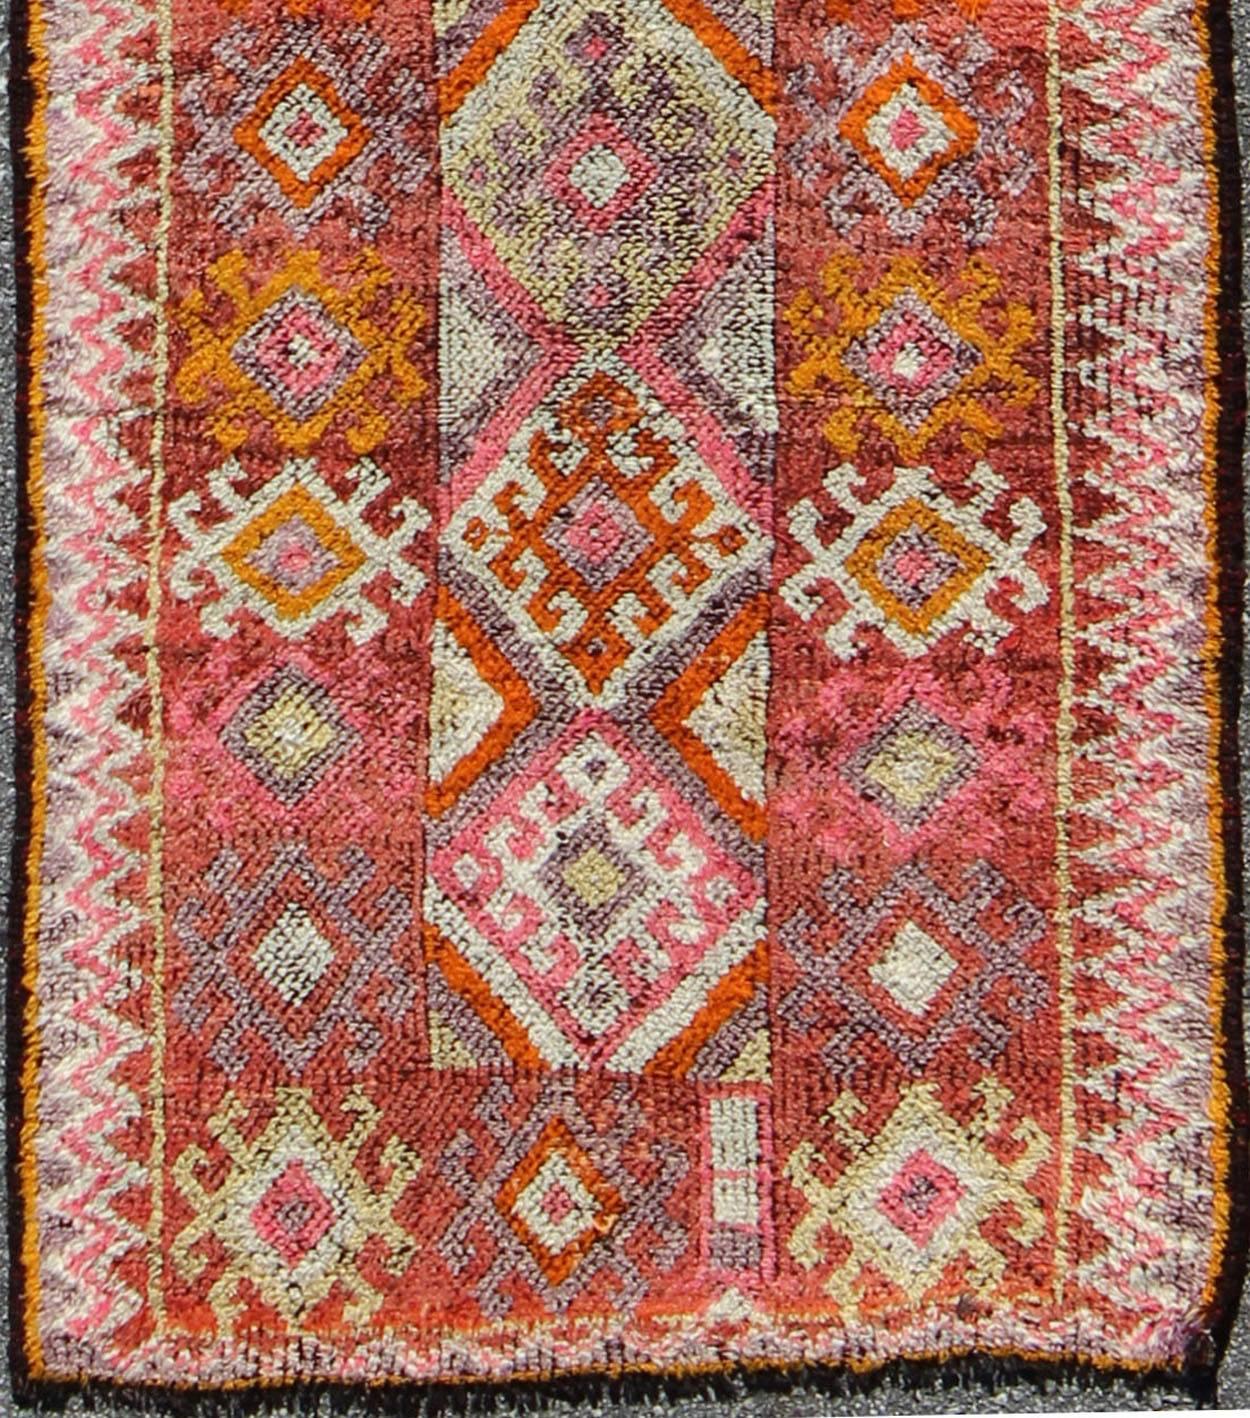 Dimensions: 2'11 x 9'4.
This geometric and tribal rug demonstrates an ostentatious side of modern design Turkish weaving. The various shades of red, softened by age, pair elegantly with the bold tones of scarlet, orange and charcoal, laid out